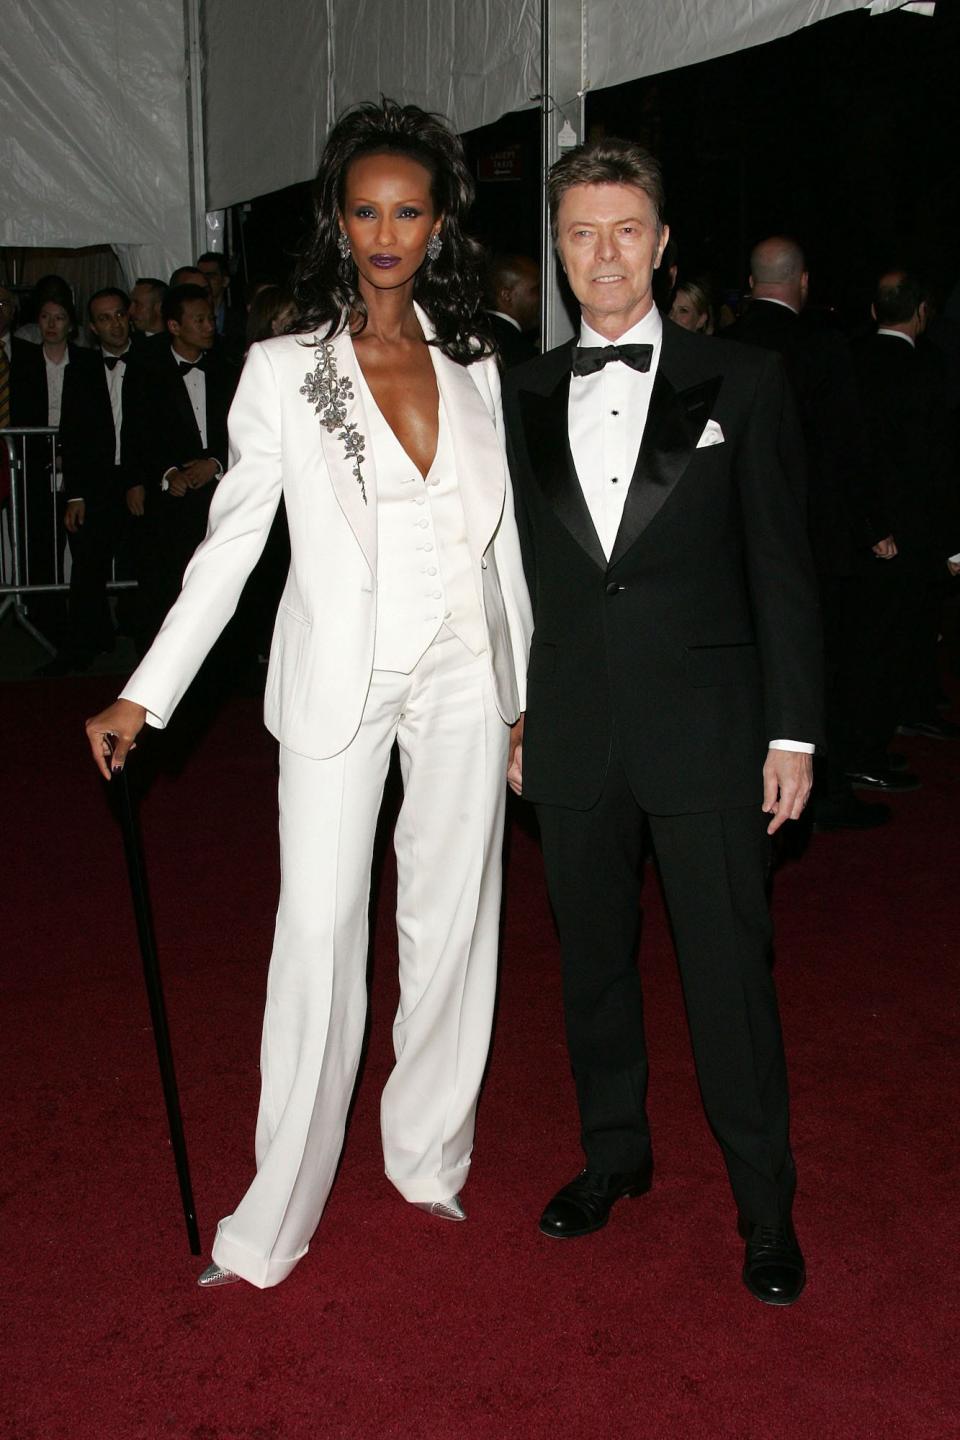 Iman and David Bowie attend the 2007 Met Gala.